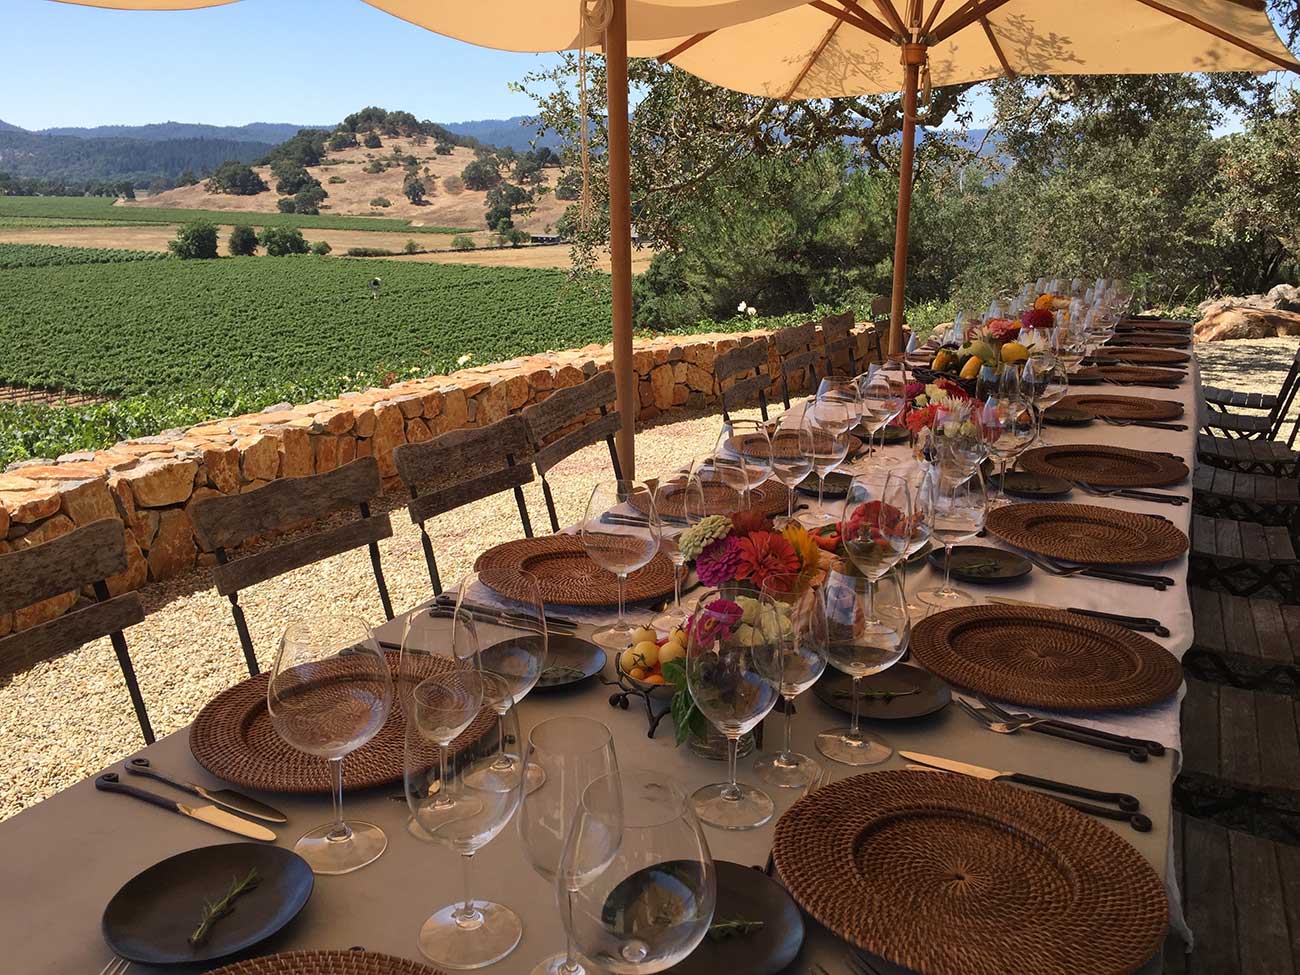 Tabletop design with crystal and flowers overlooking a vineyard in Napa valley